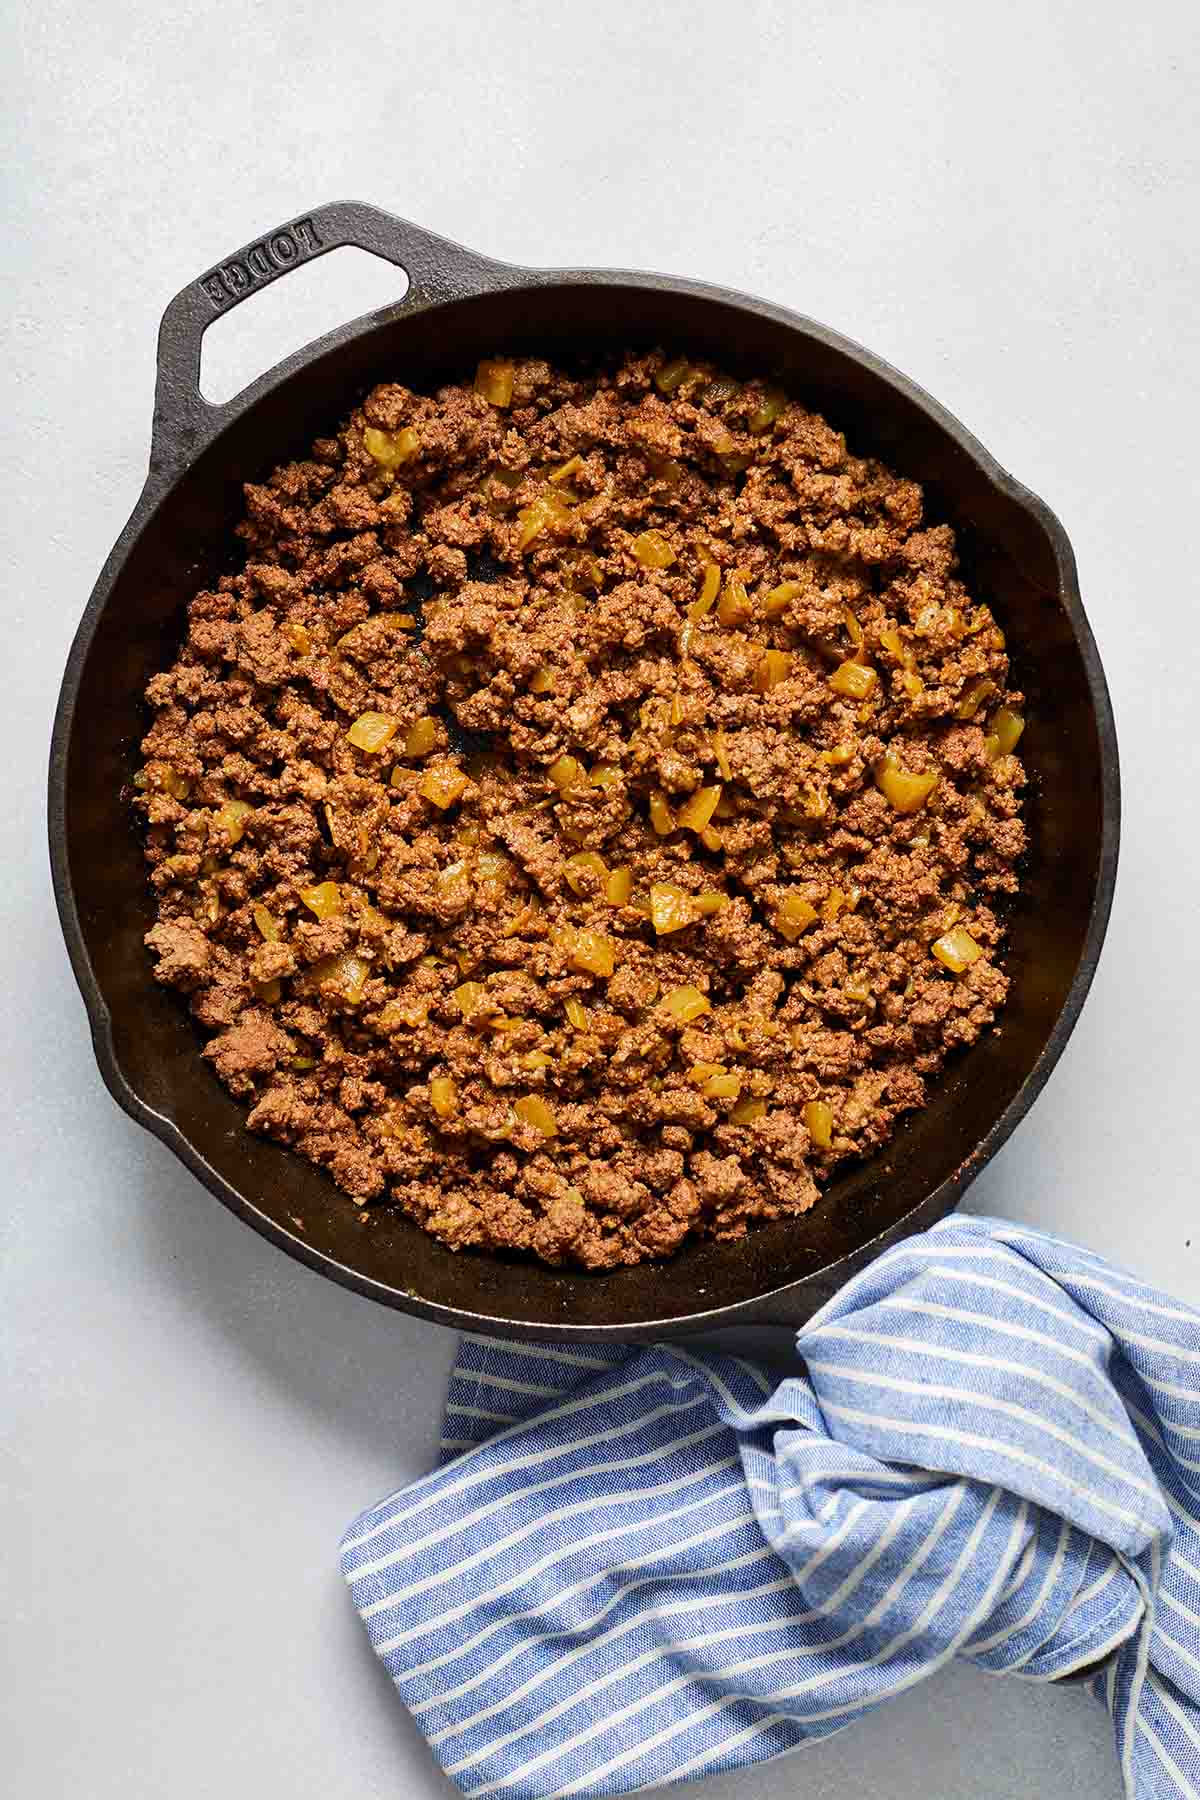 Ground beef mixture for fajitas in a black cast iron skillet.